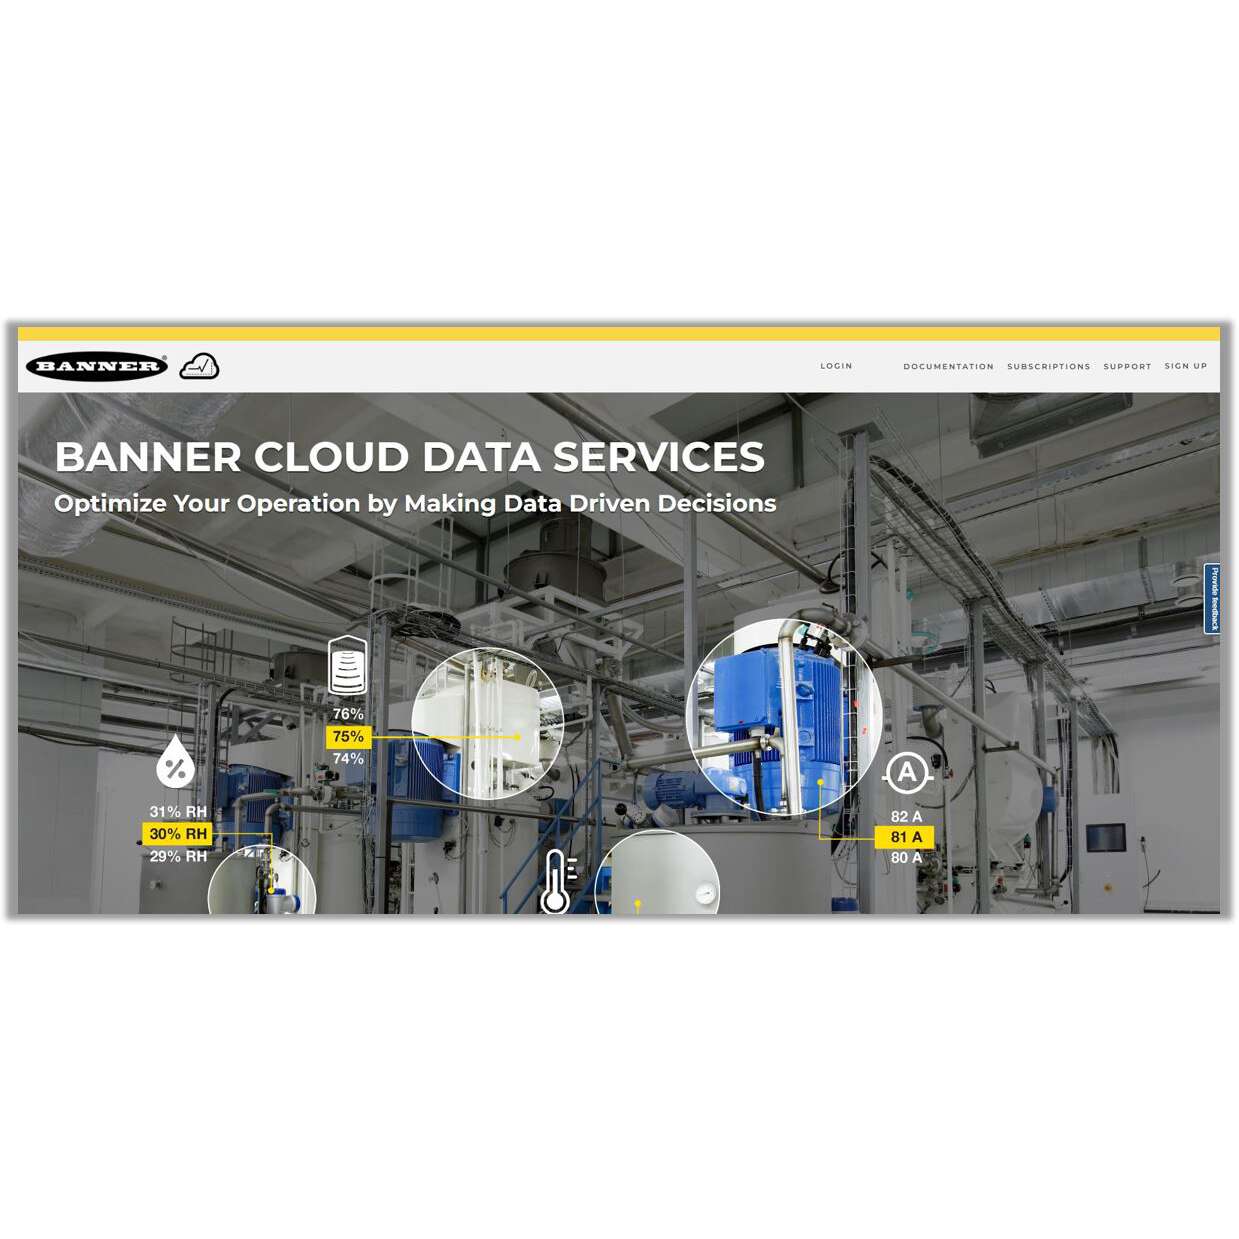 Activating Banner Cloud Data Services with the Asset Monitoring Gateway